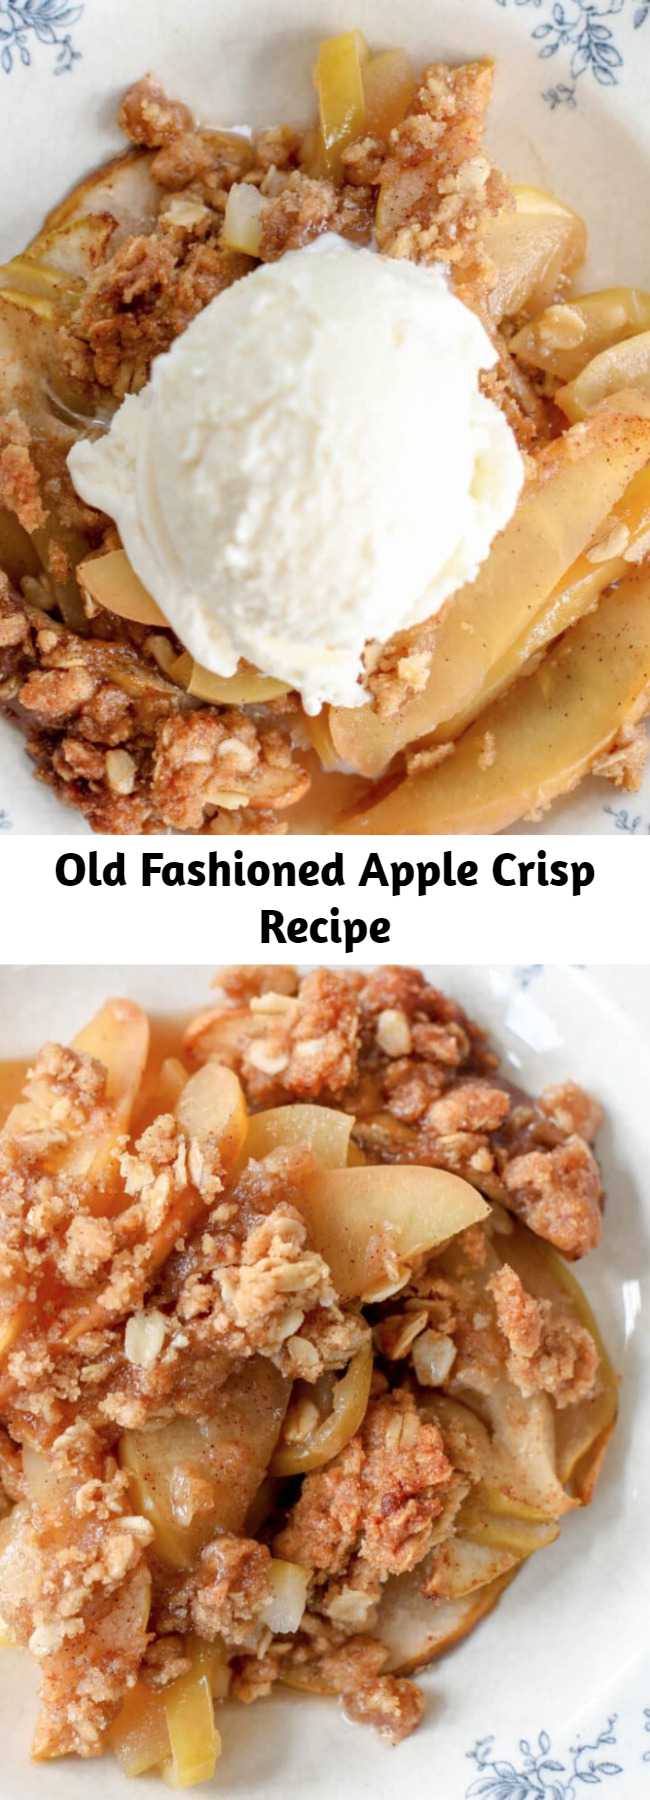 Old Fashioned Apple Crisp Recipe - Buttery brown sugar and oat topping over sweet baked apples is a heavenly dessert year round. Topped with vanilla ice cream this is a classic dessert that's great for any occassion.